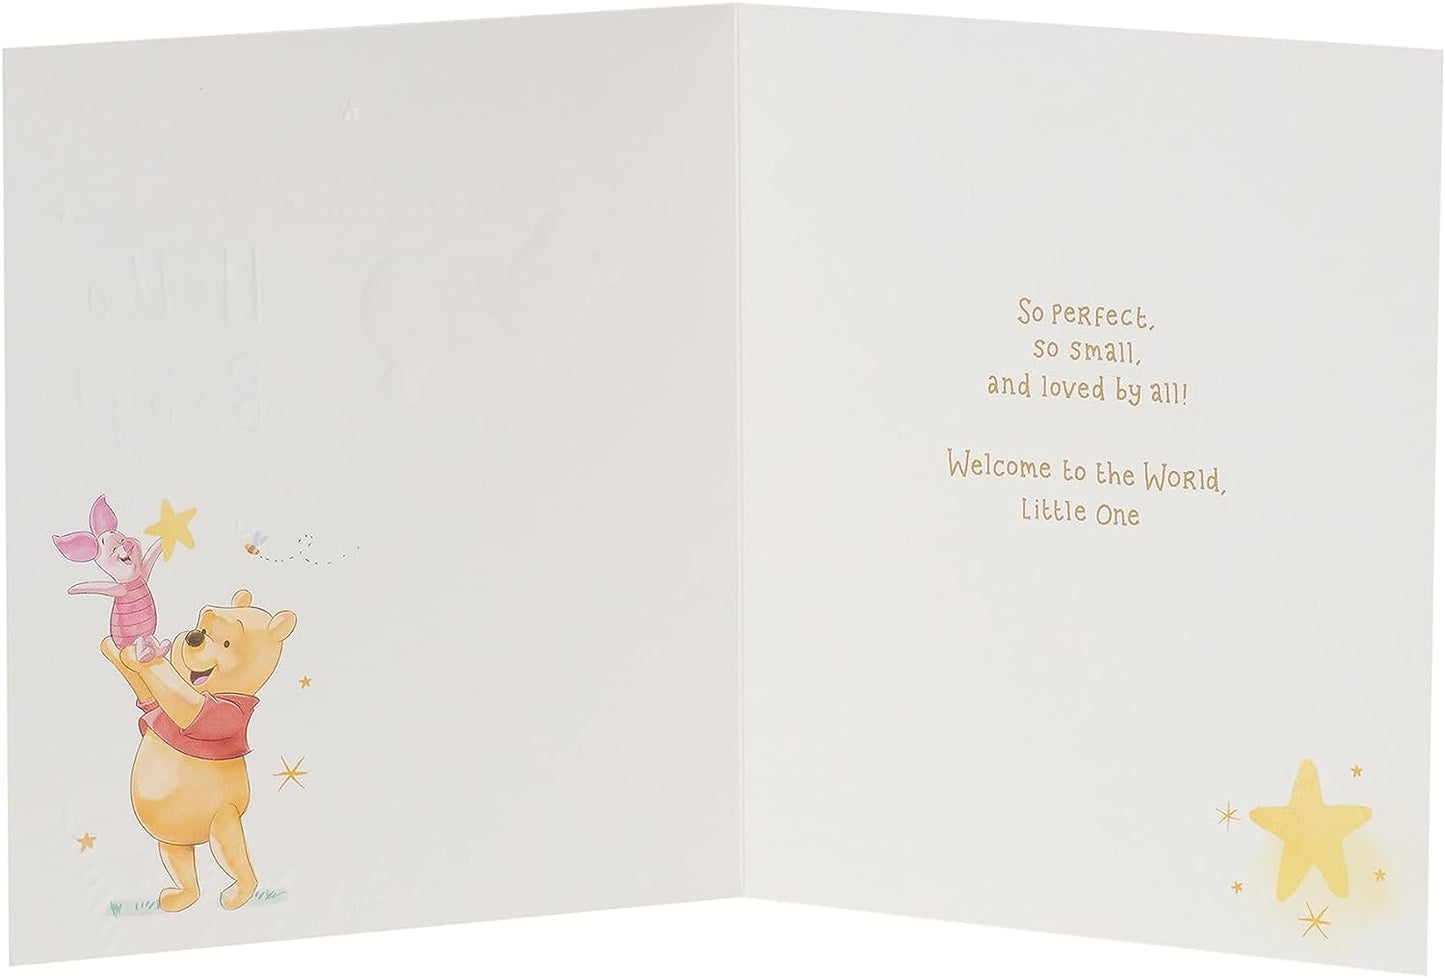 Moon Design Winnie The Pooh New Baby Card